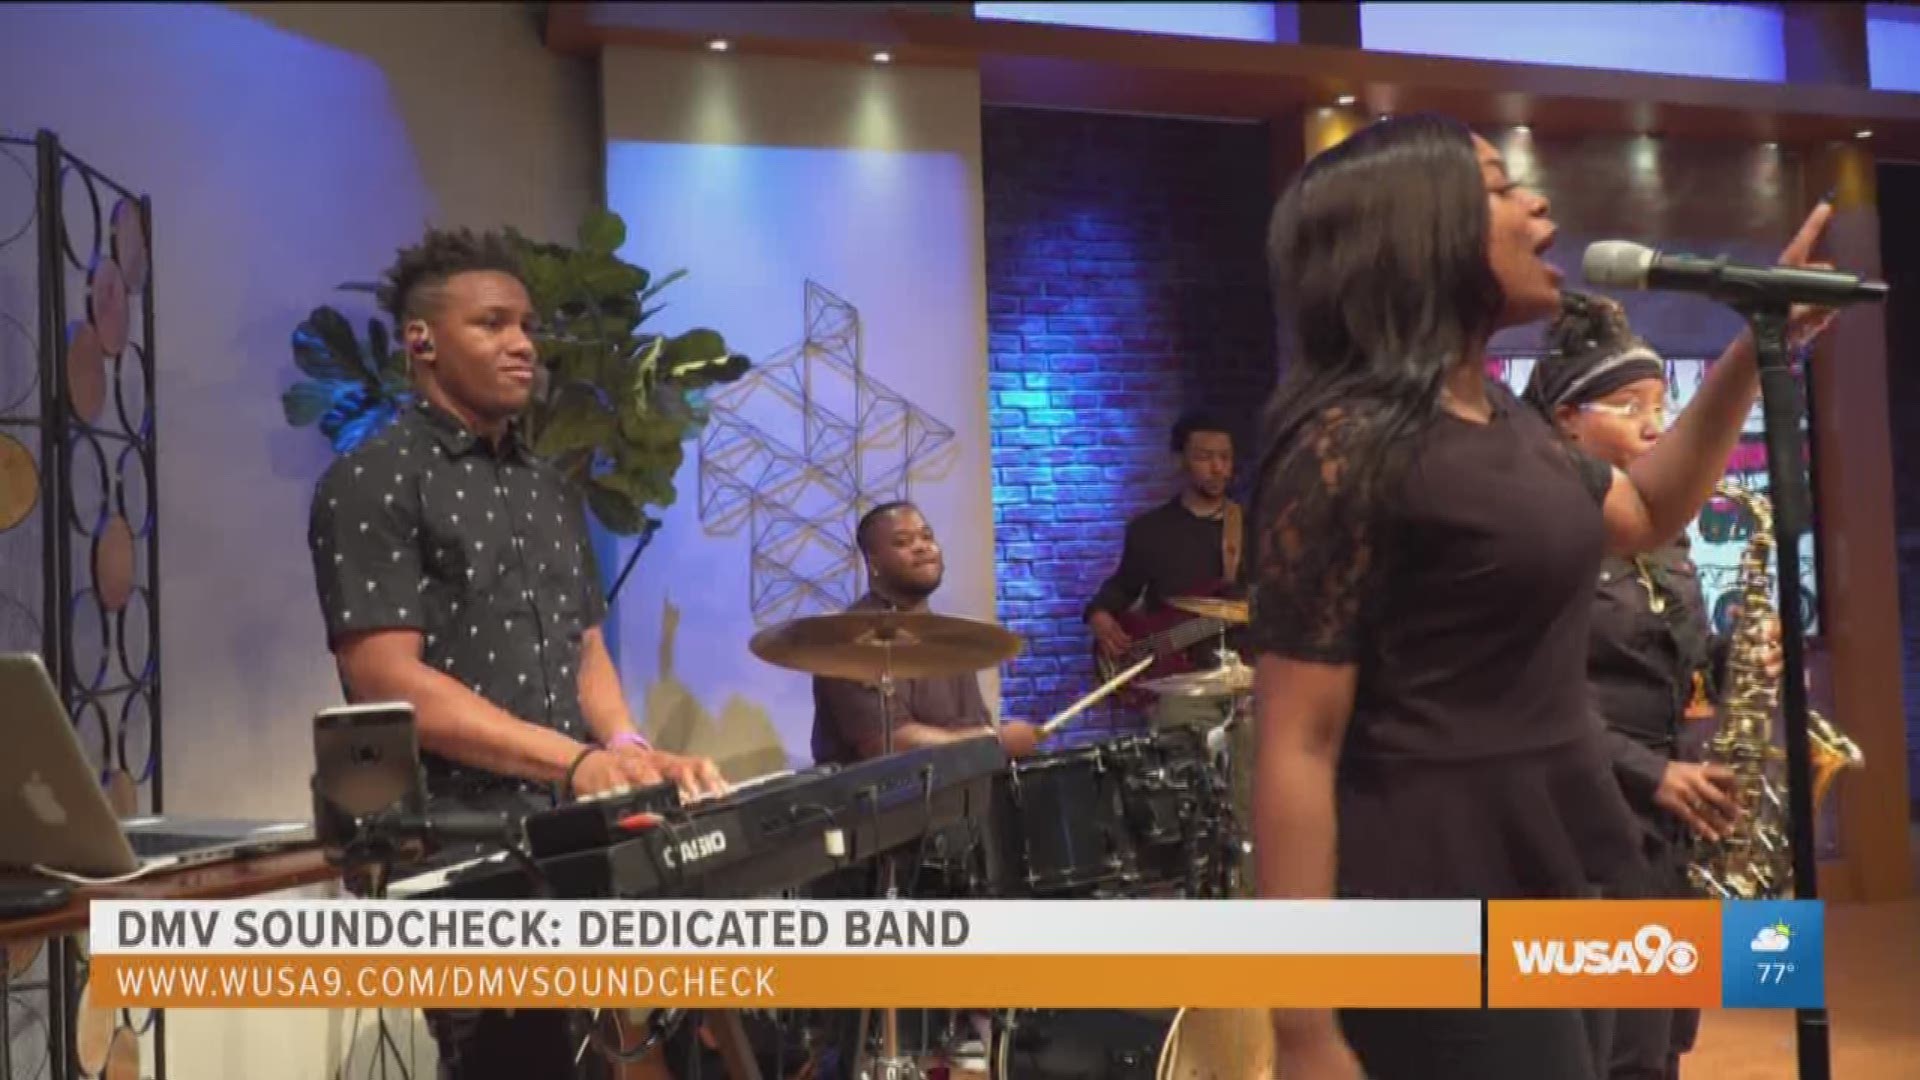 Hailing from Gwynn Park High School in Prince George's County, the Dedicated Band came together to deliver a rich sound with a keyboardist, saxaphone player, drummer, guitar player, and a vocalist with a strong voice!  For more local up-and-coming bands check out wusa9.com/dmvsoundcheck